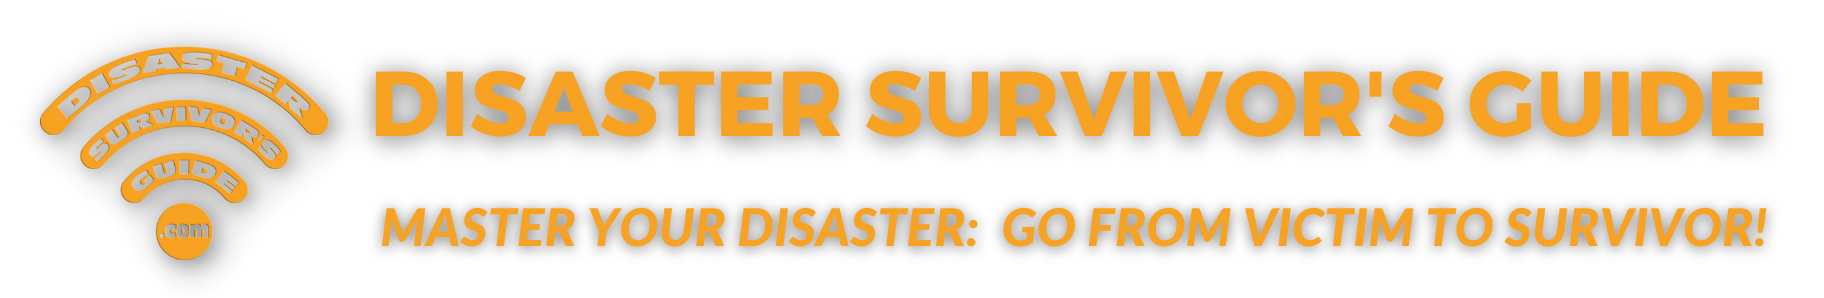 Logo of Disaster Survivor's Guide with beacon graphic on the left and tagline that reads Master Your Disaster: Go From Victim to Survivor!